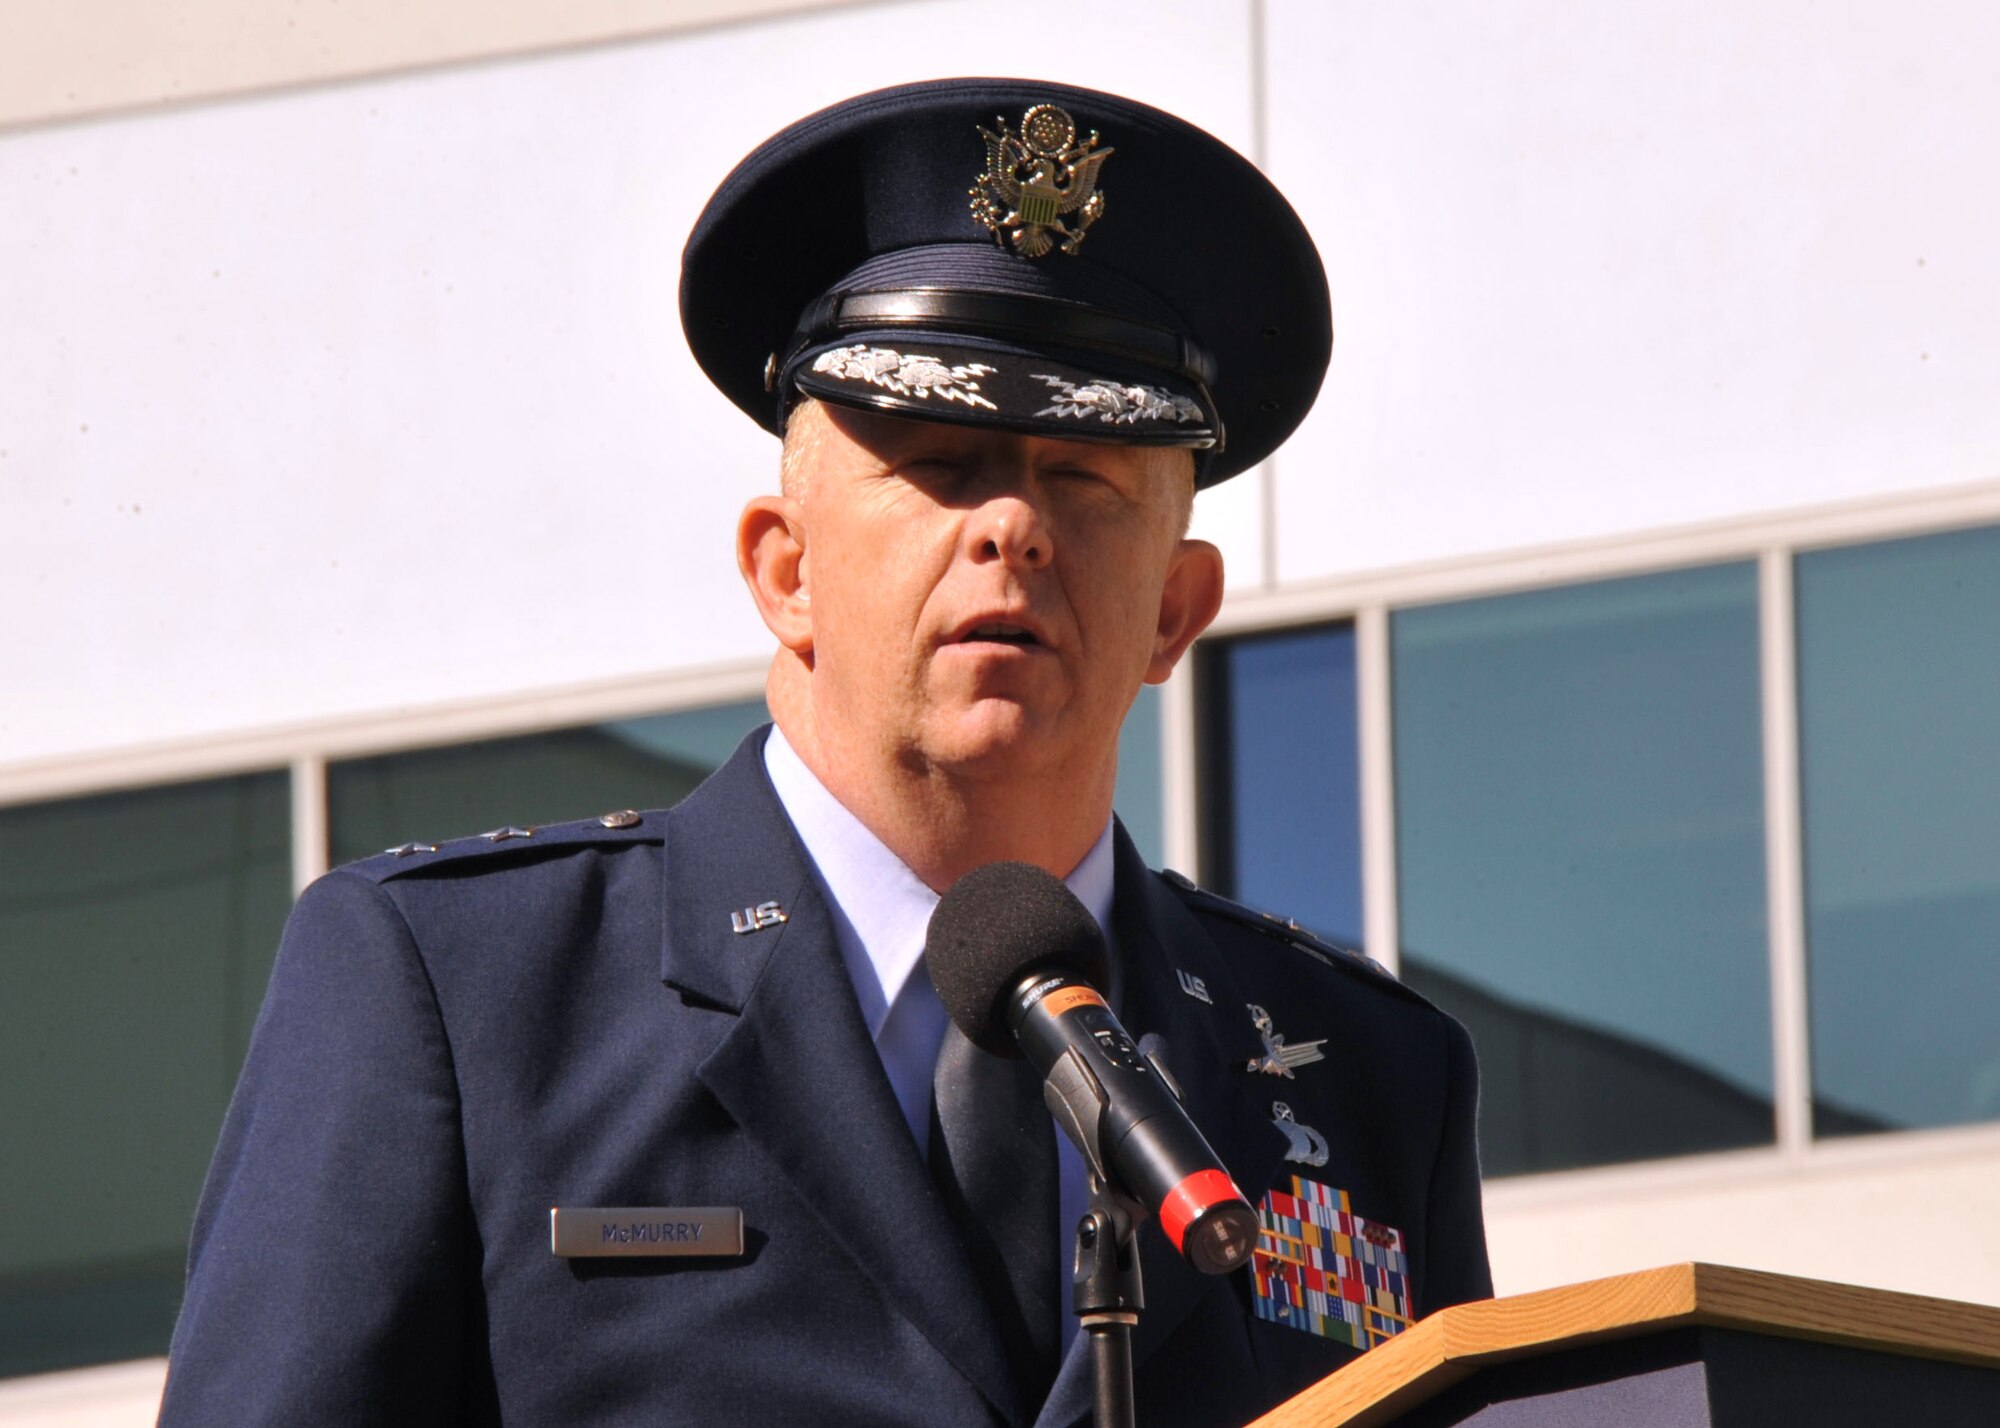 Maj. Gen. Robert McMurry, SMC vice commander, addresses the audience during the  the National POW/MIA Recognition Day ceremony at the Space and Missile Systems Center's Schriever Space Complex flagpole at Los Angeles Air Force Base in El Segundo, Calif. (U.S. Air Force photo/Sarah Corrice)